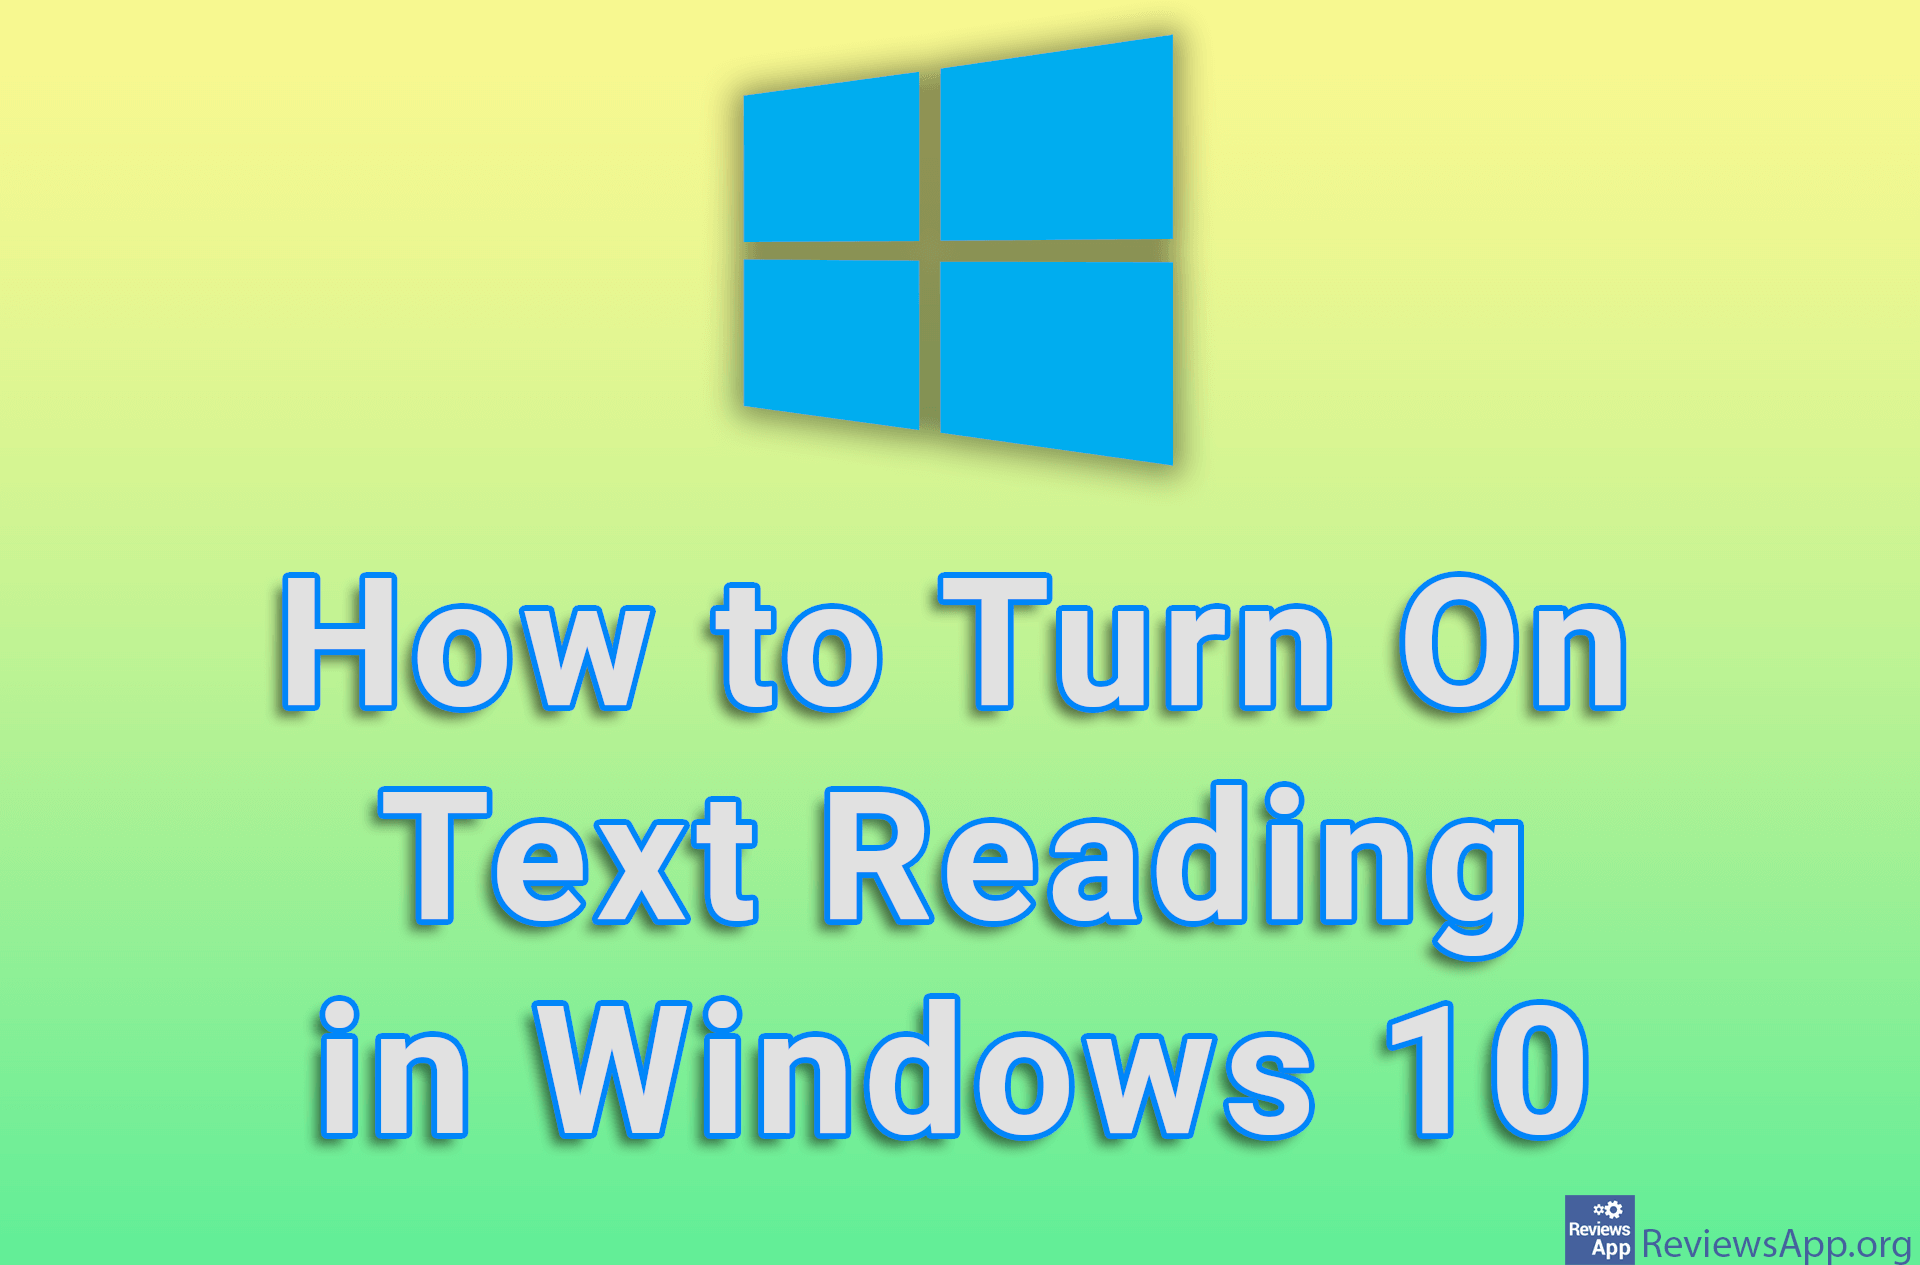 How to Turn On Text Reading in Windows 10